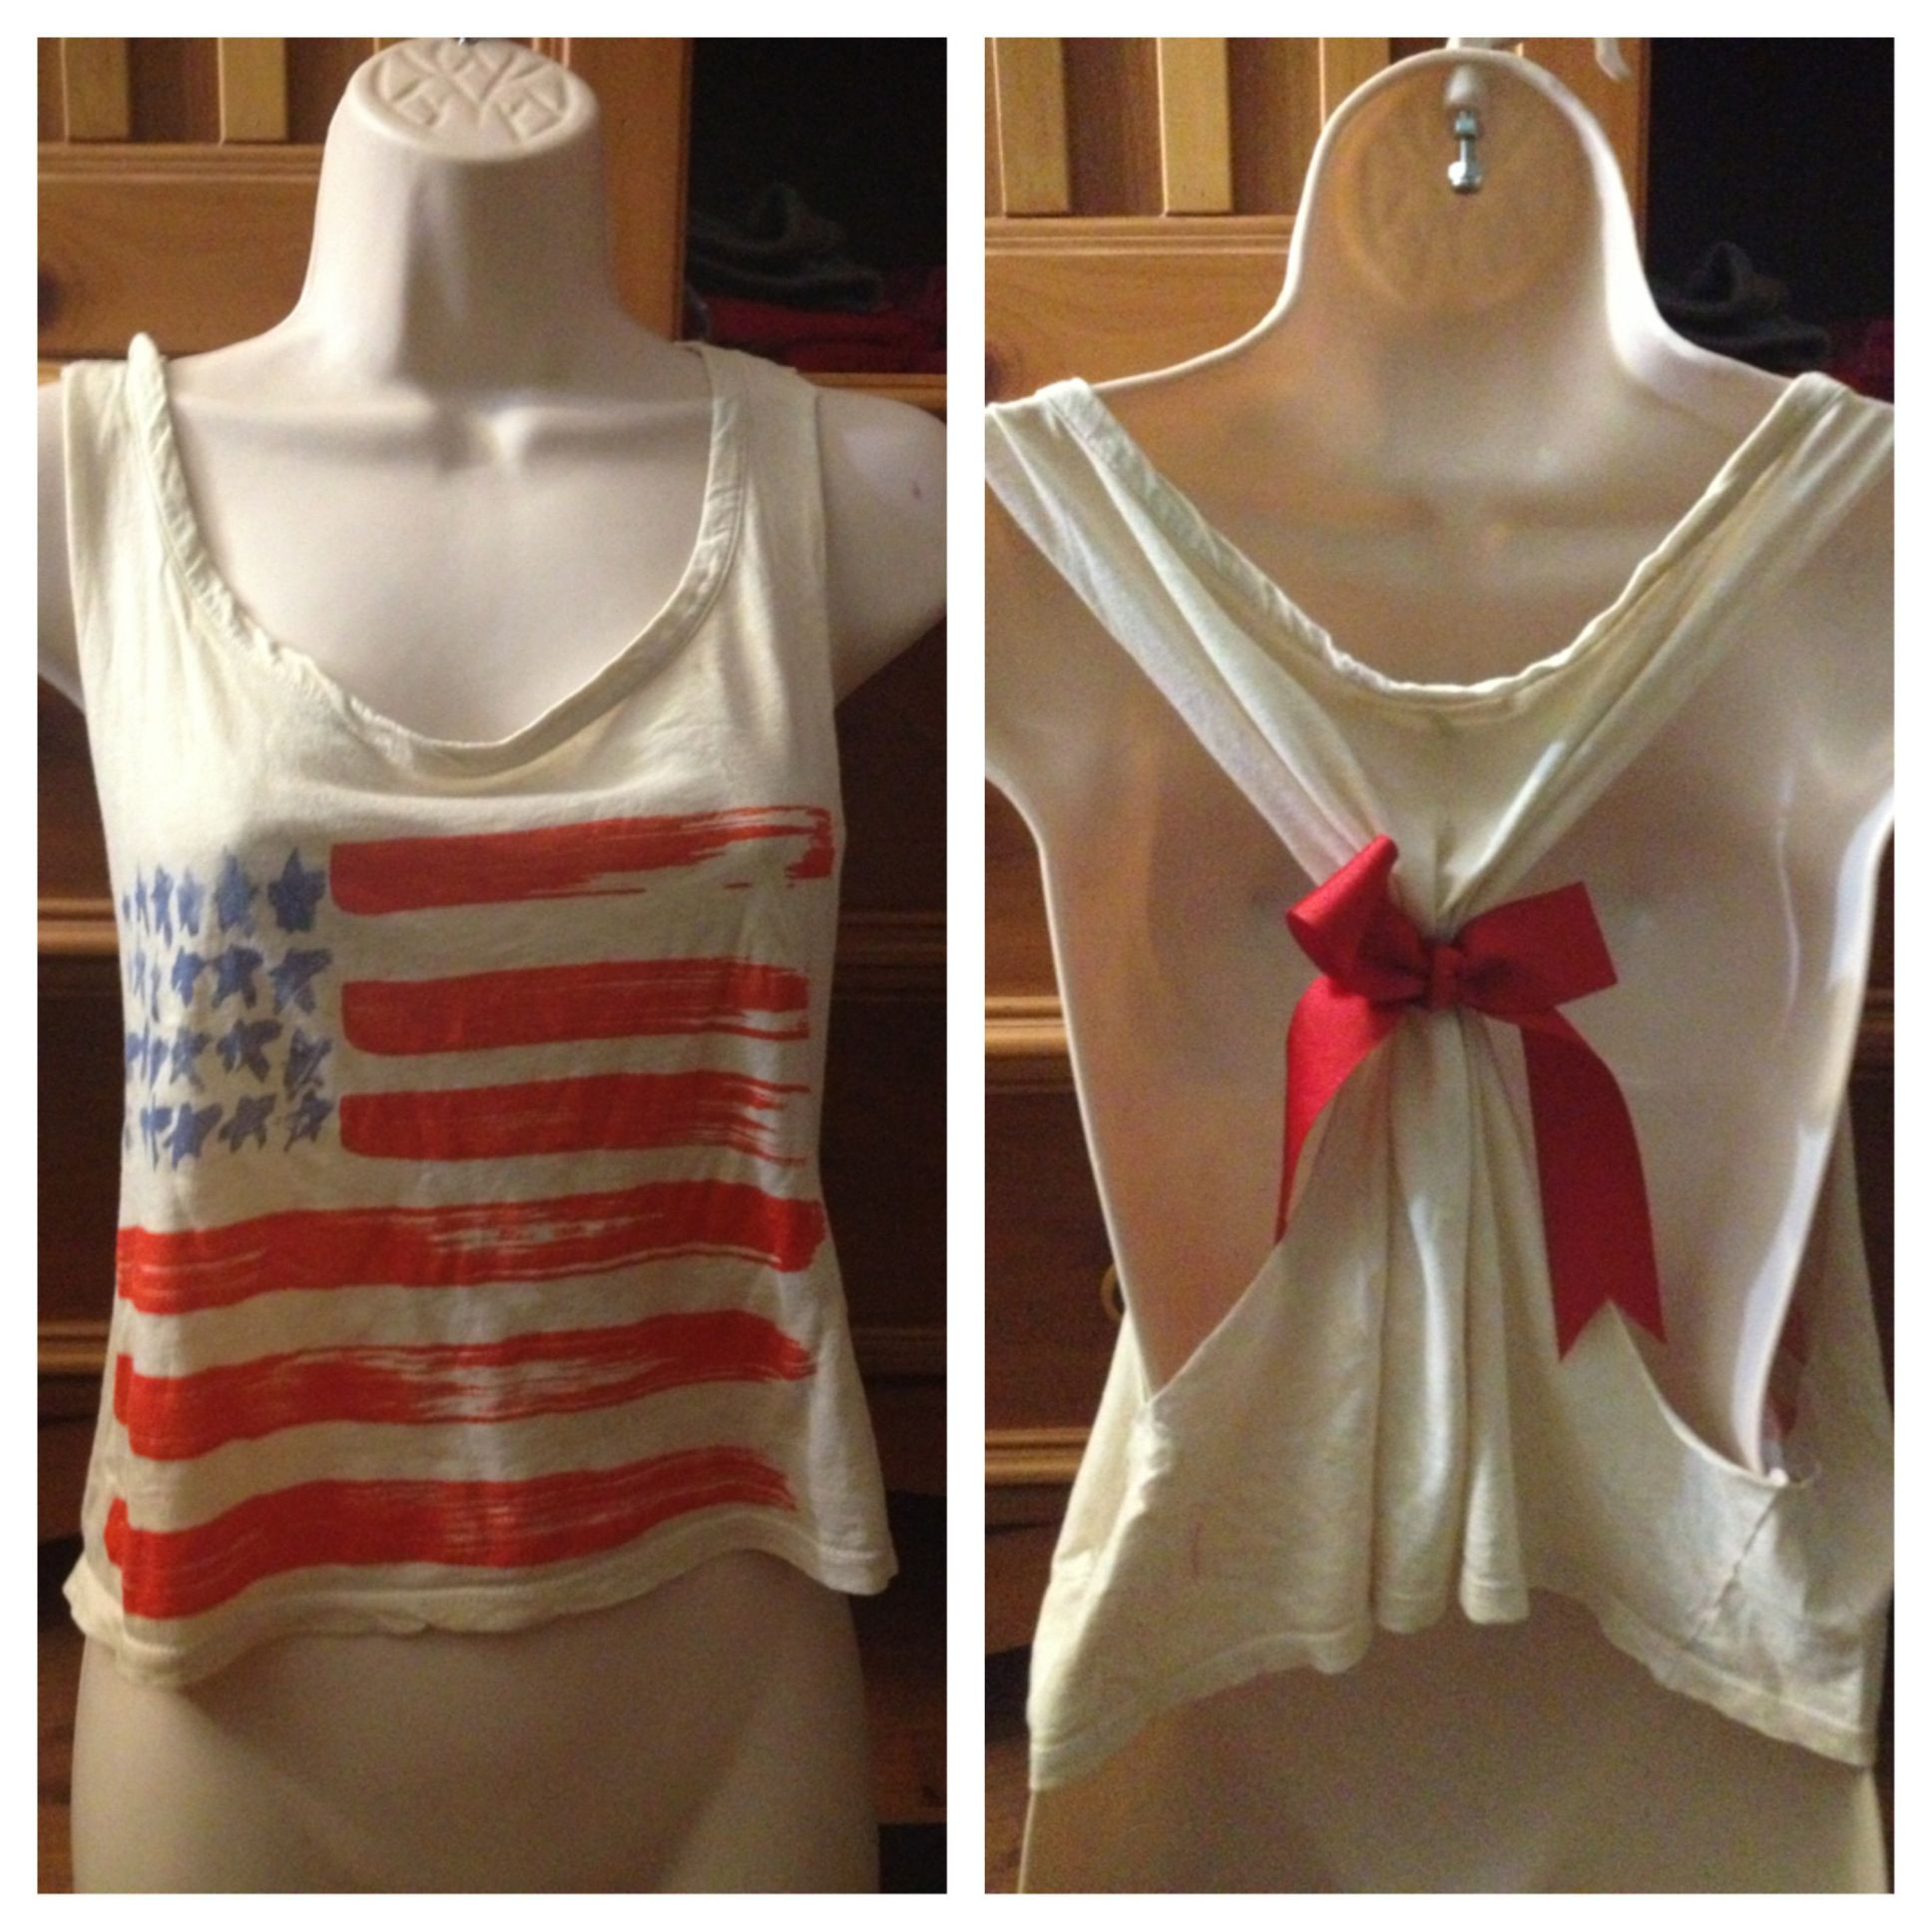 Diy Fourth Of July Outfit
 Homemade Fourth of July tank top DIY outfit I love it